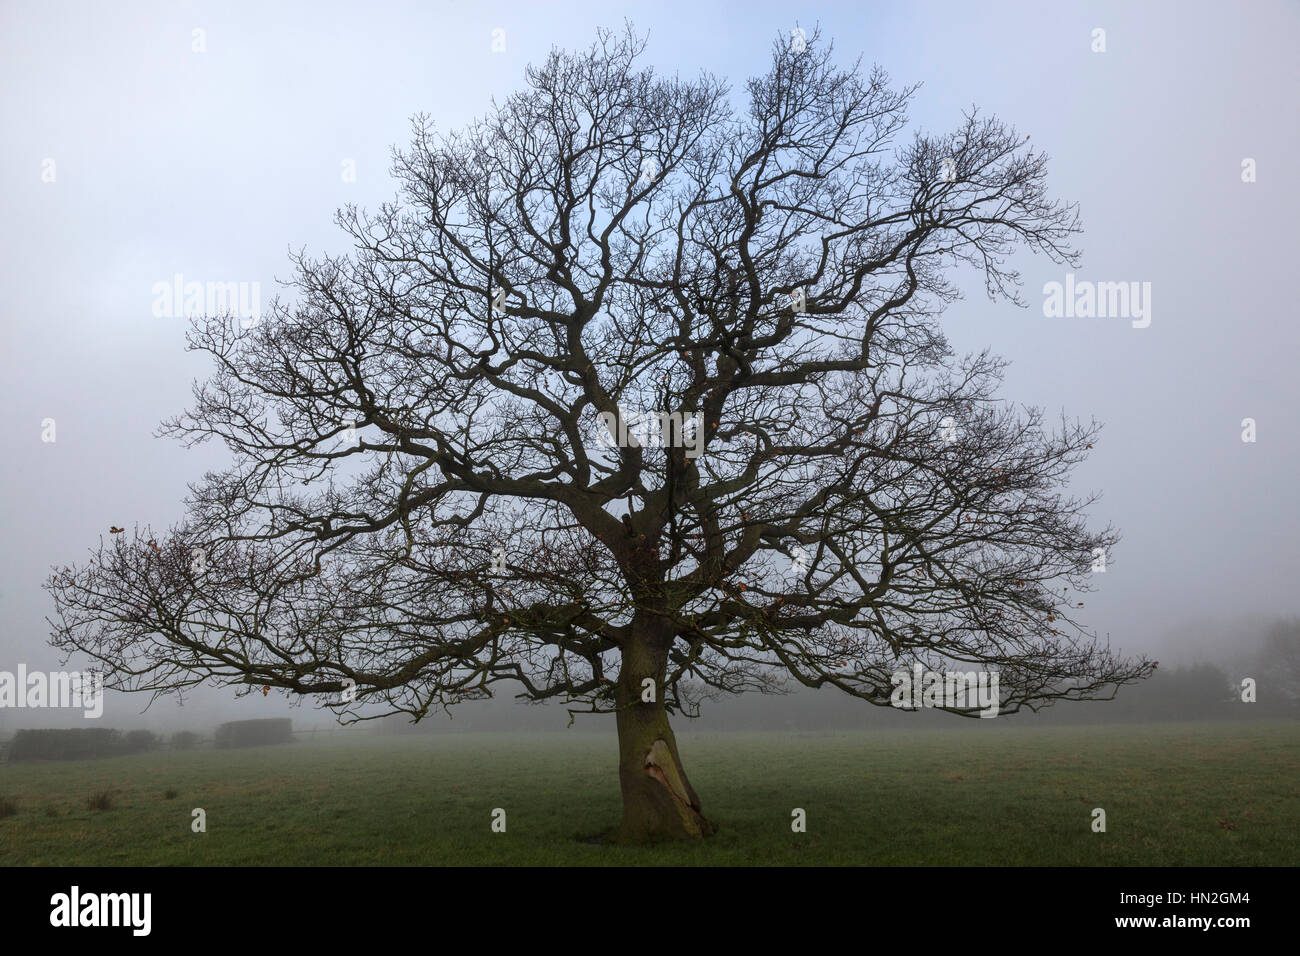 Oak tree without leaves in Autumn and Winter, a series shot from the same camera position. Stock Photo